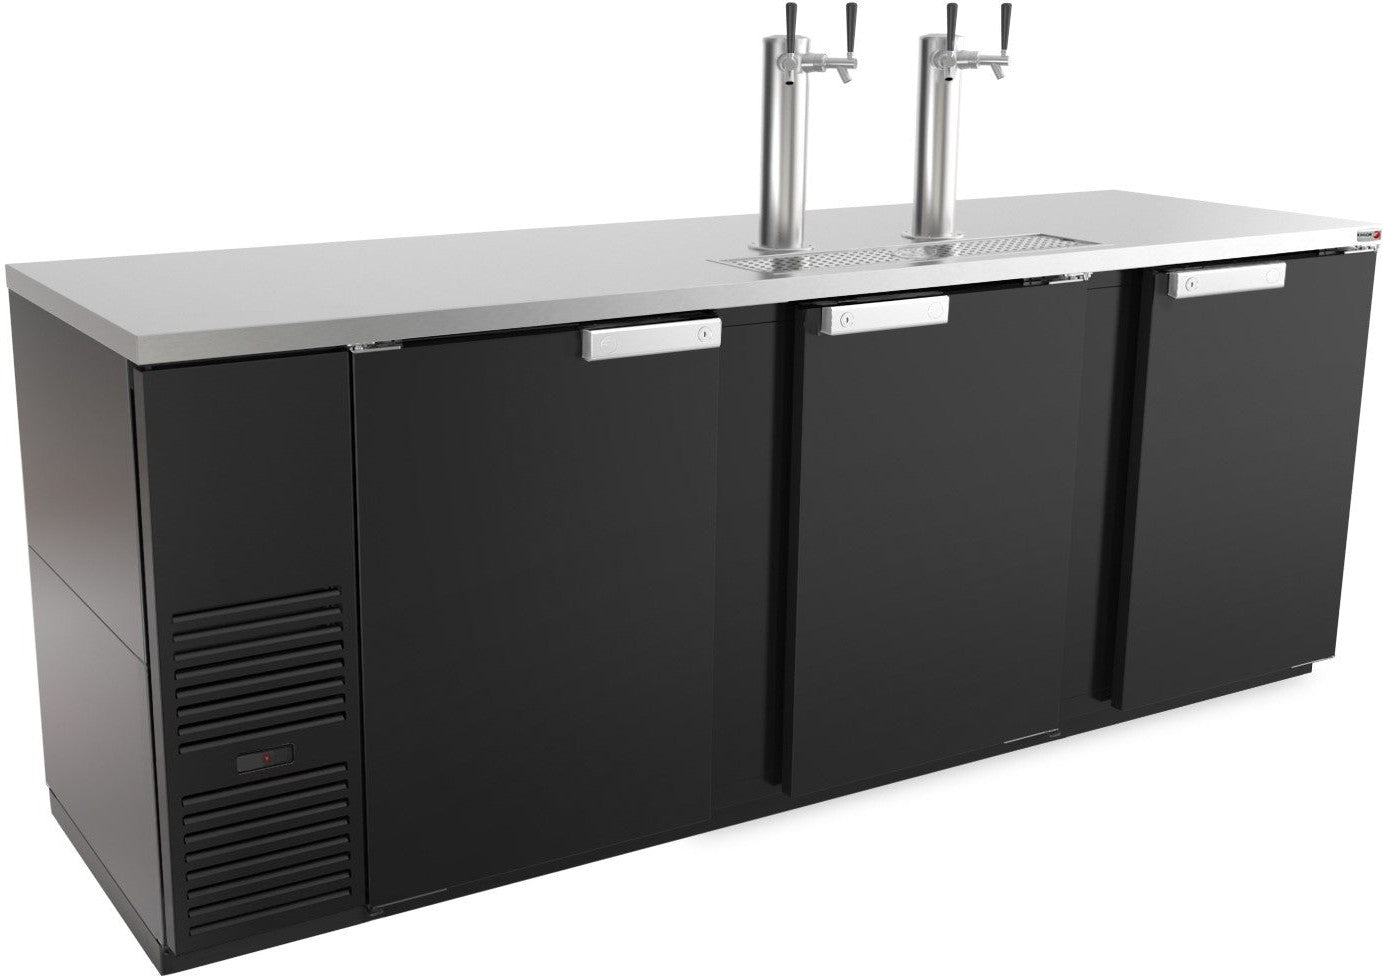 Fagor - FDD Series 115 V, 95.5" Black Vinyl Finish Three Door Direct Draw Beer Cooler with 2 Towers & 4 Taps - FDD-95-N